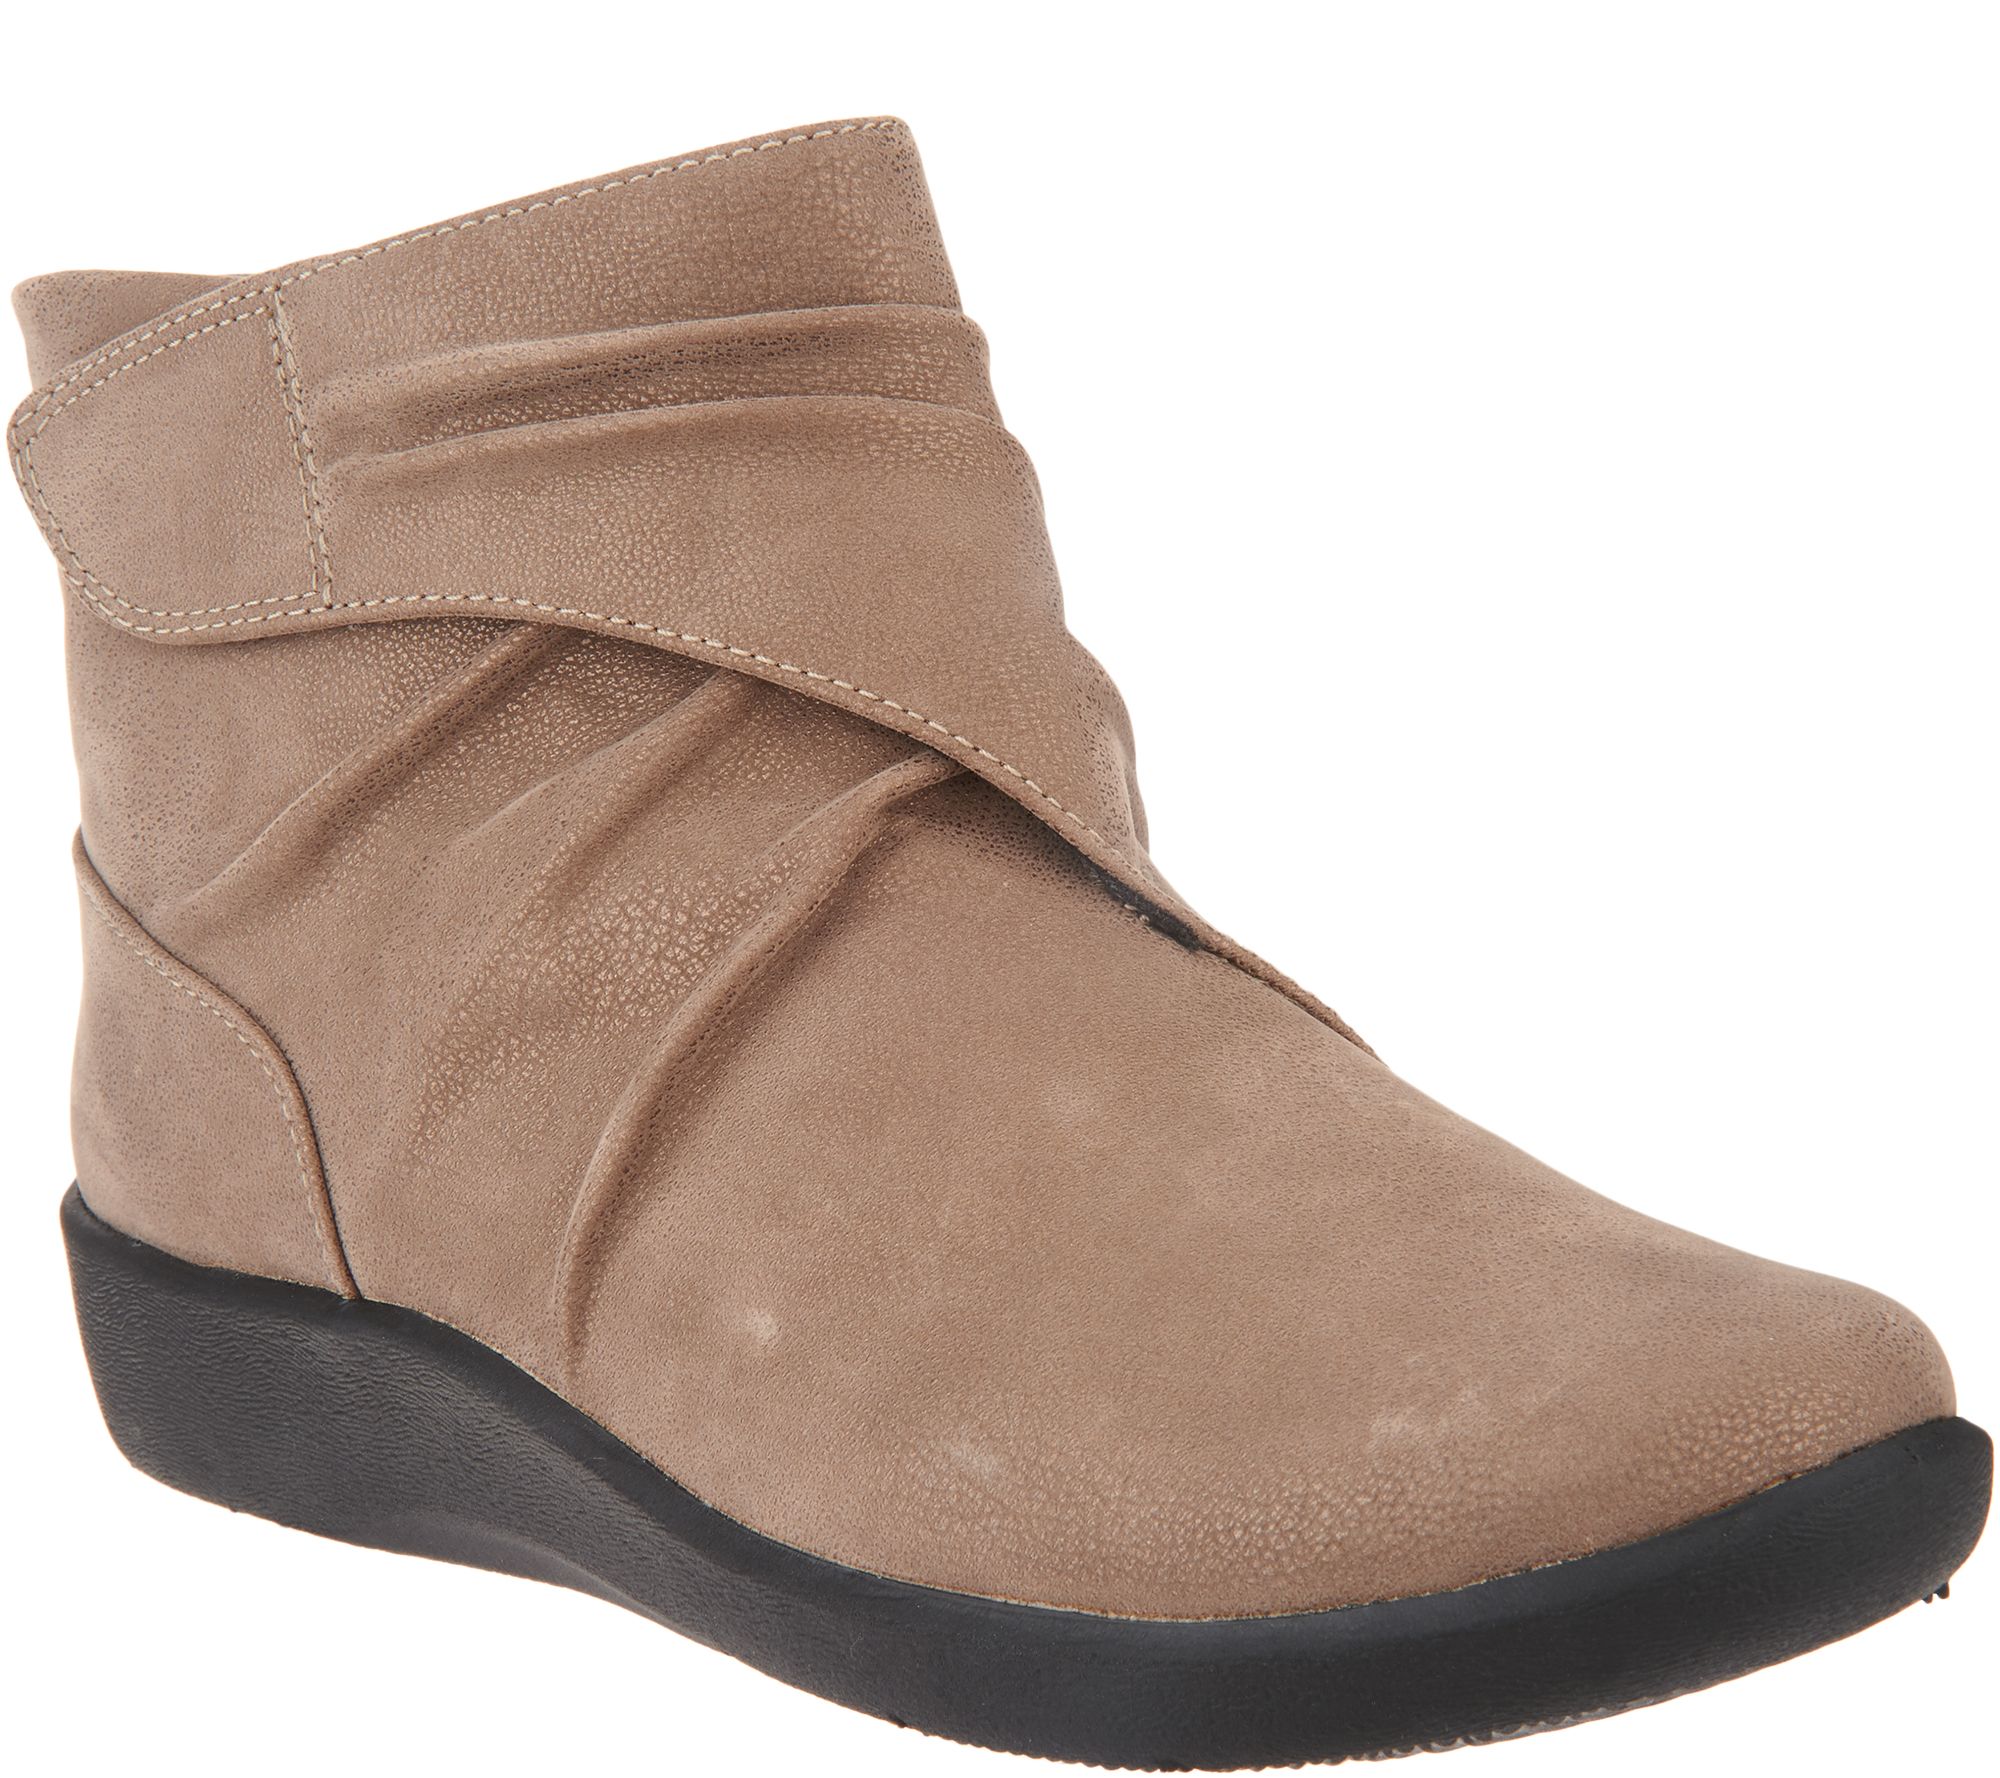 clarks cloudsteppers sillian tana women's ankle boots